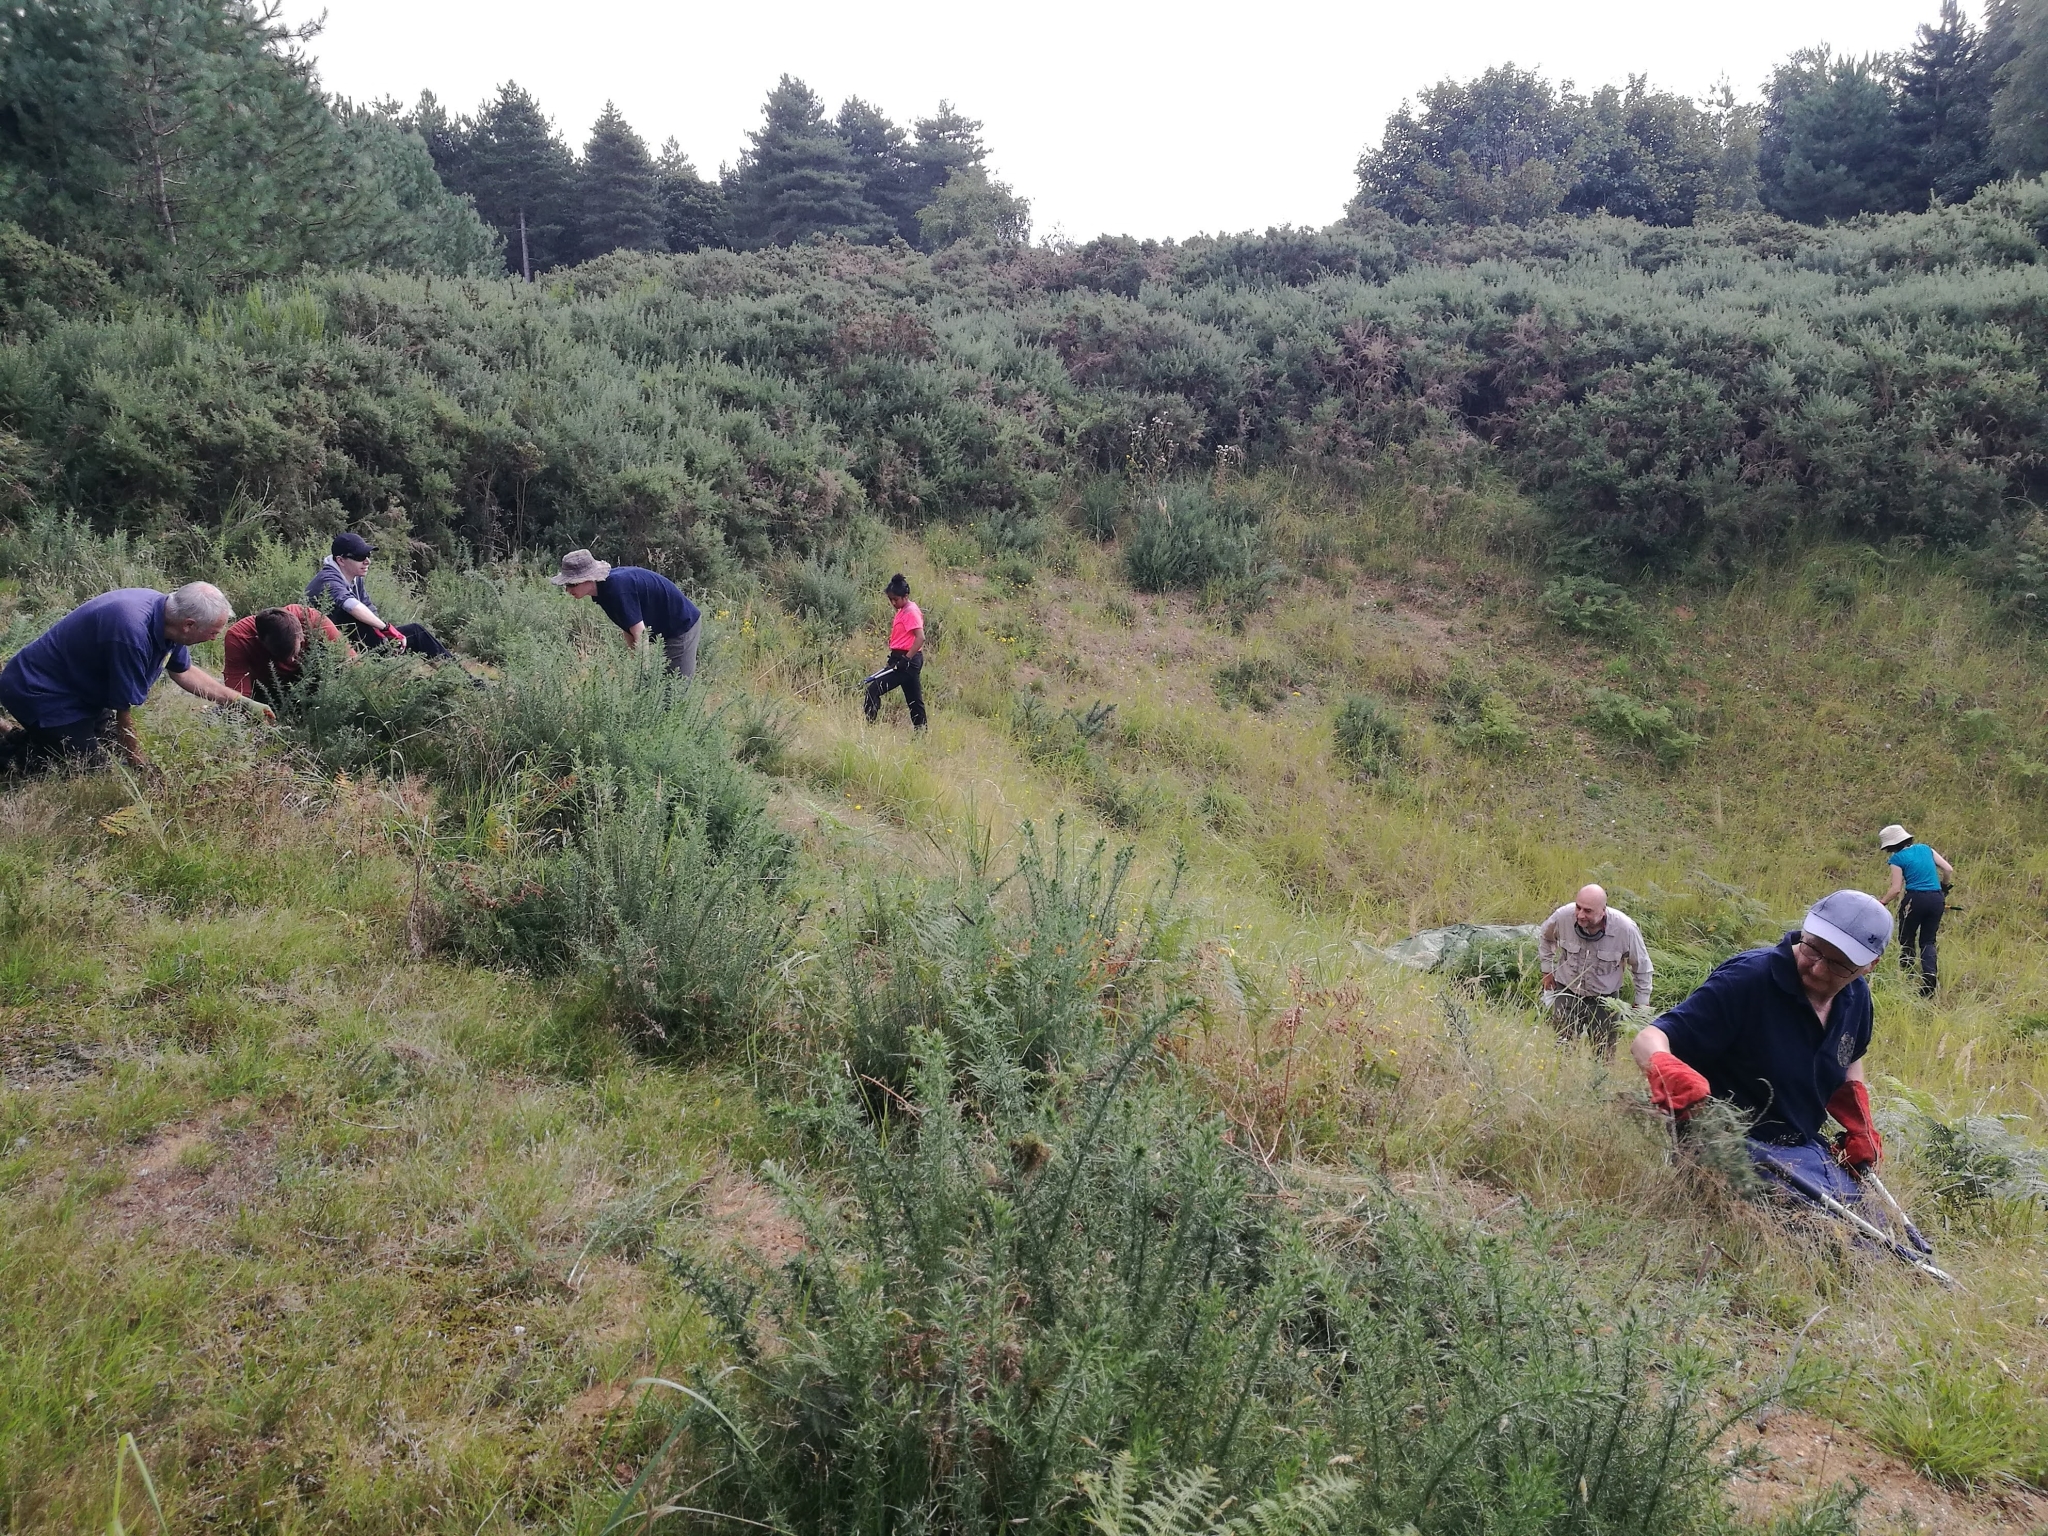 A photo from the FoTF Conservation Event - August 2023 - Gorse Removal at Mildenhall Mugwort Pit : Volunteers work on the slopes of Mildenhall Mugwort Pit to remove Gorse and other vegetation